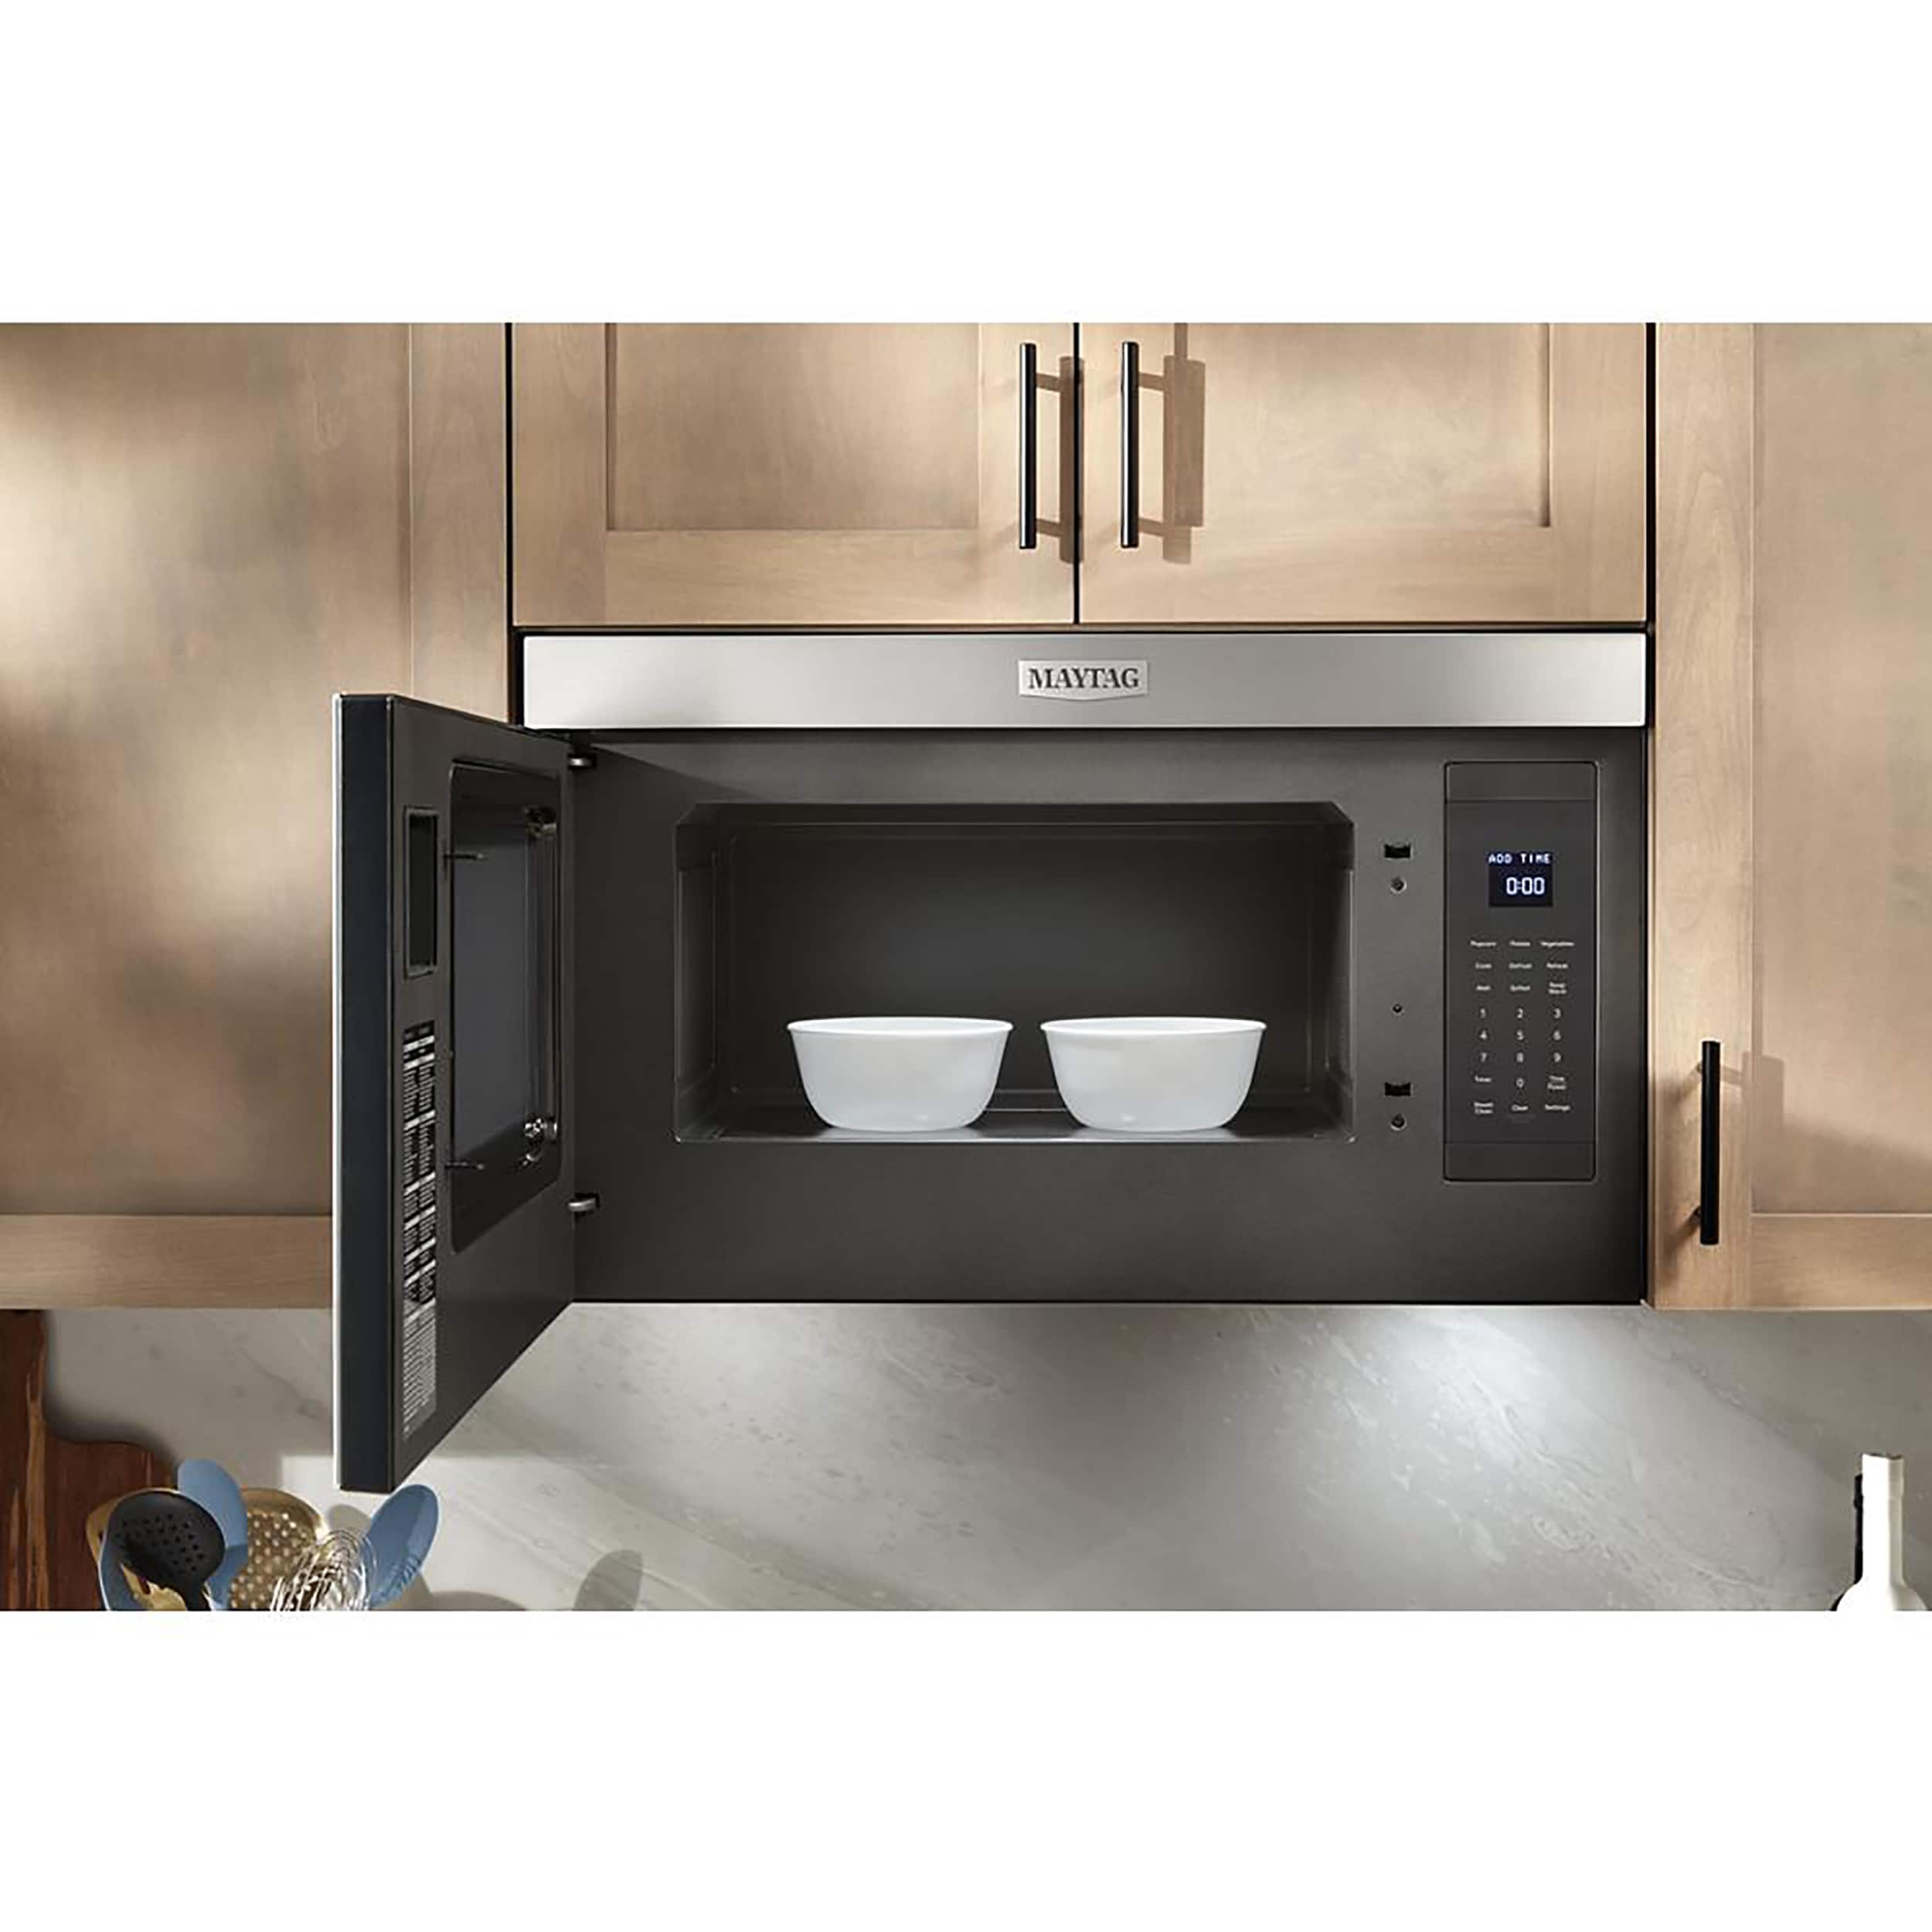 Maytag 30-inch, 1.7 cu.ft. Over-the-Range Microwave Oven with Stainless  Steel Interior MMV1175JW